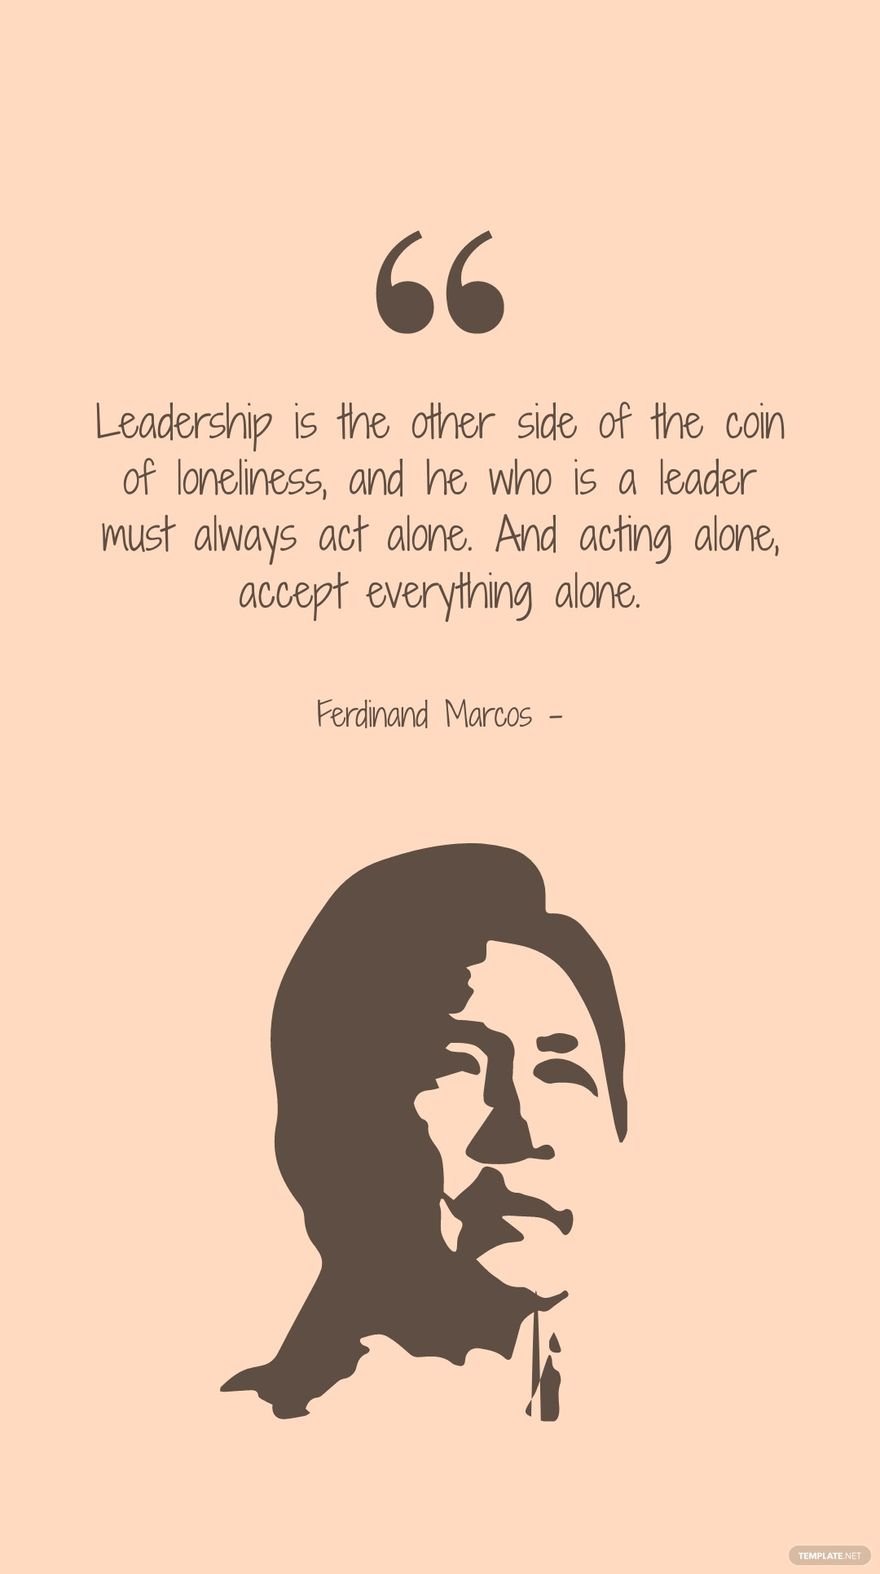 Ferdinand Marcos - Leadership is the other side of the coin of loneliness, and he who is a leader must always act alone. And acting alone, accept everything alone.